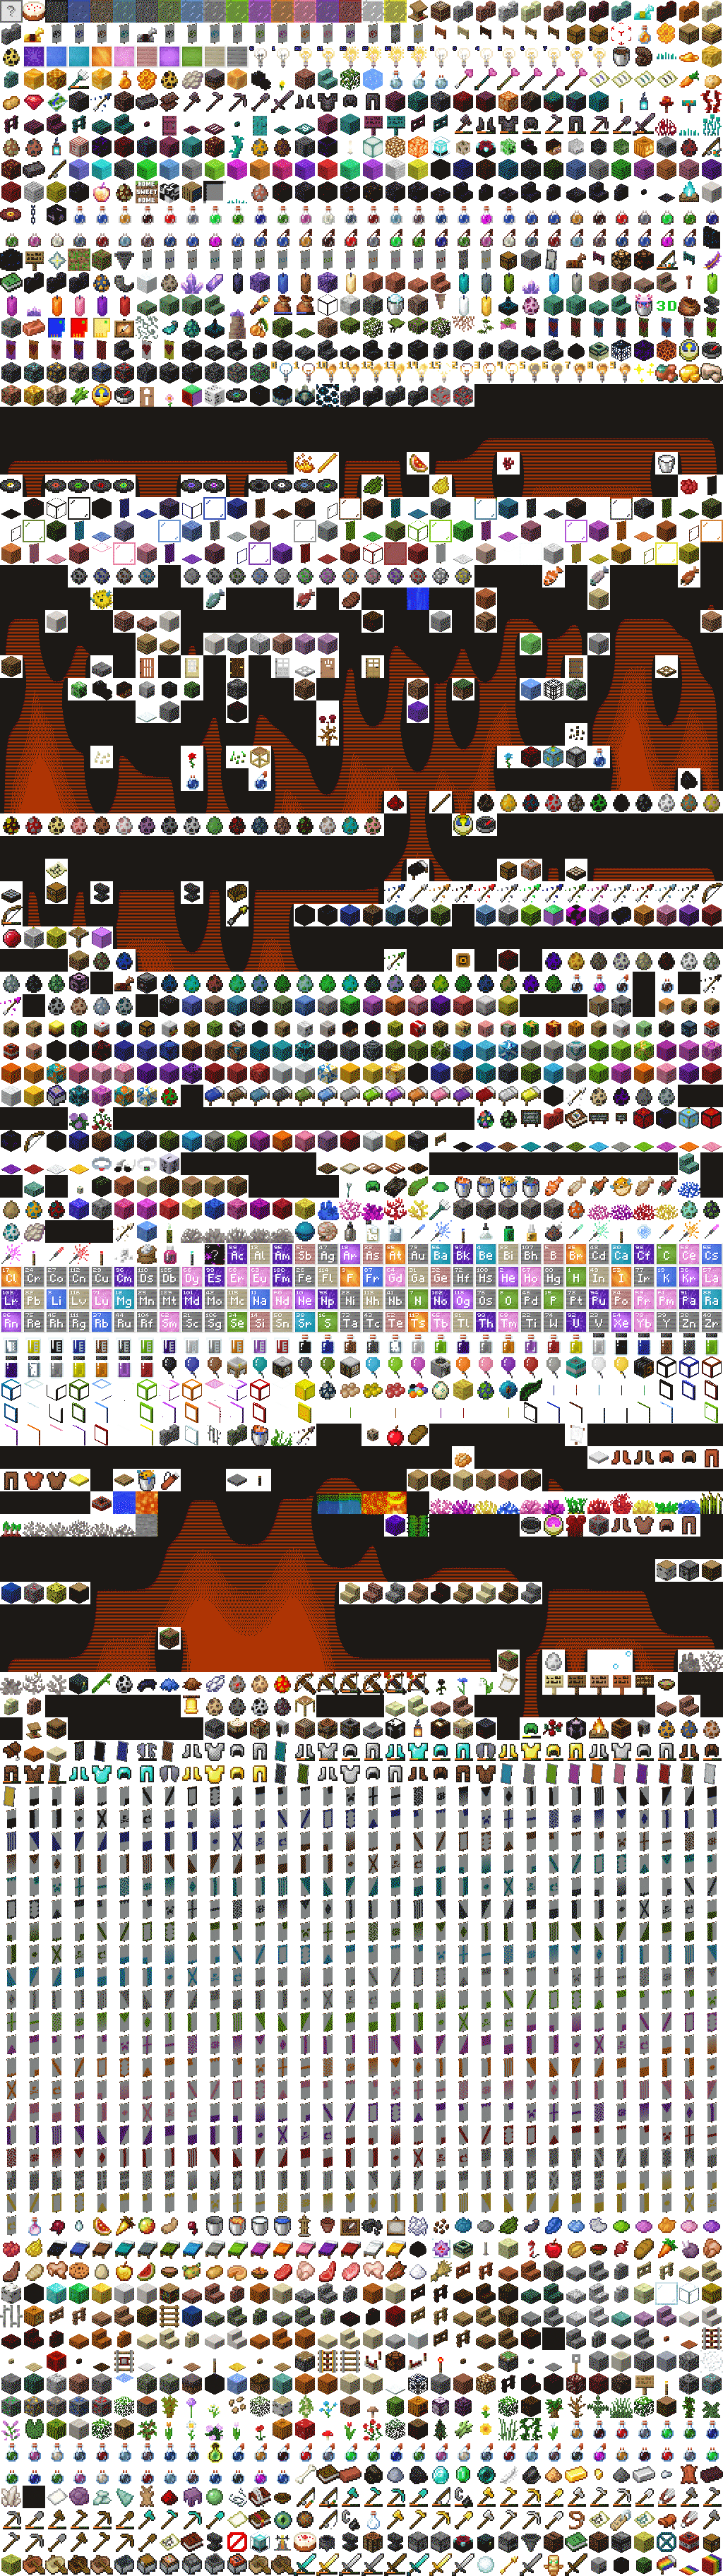 Every single Minecraft item and block that existed.